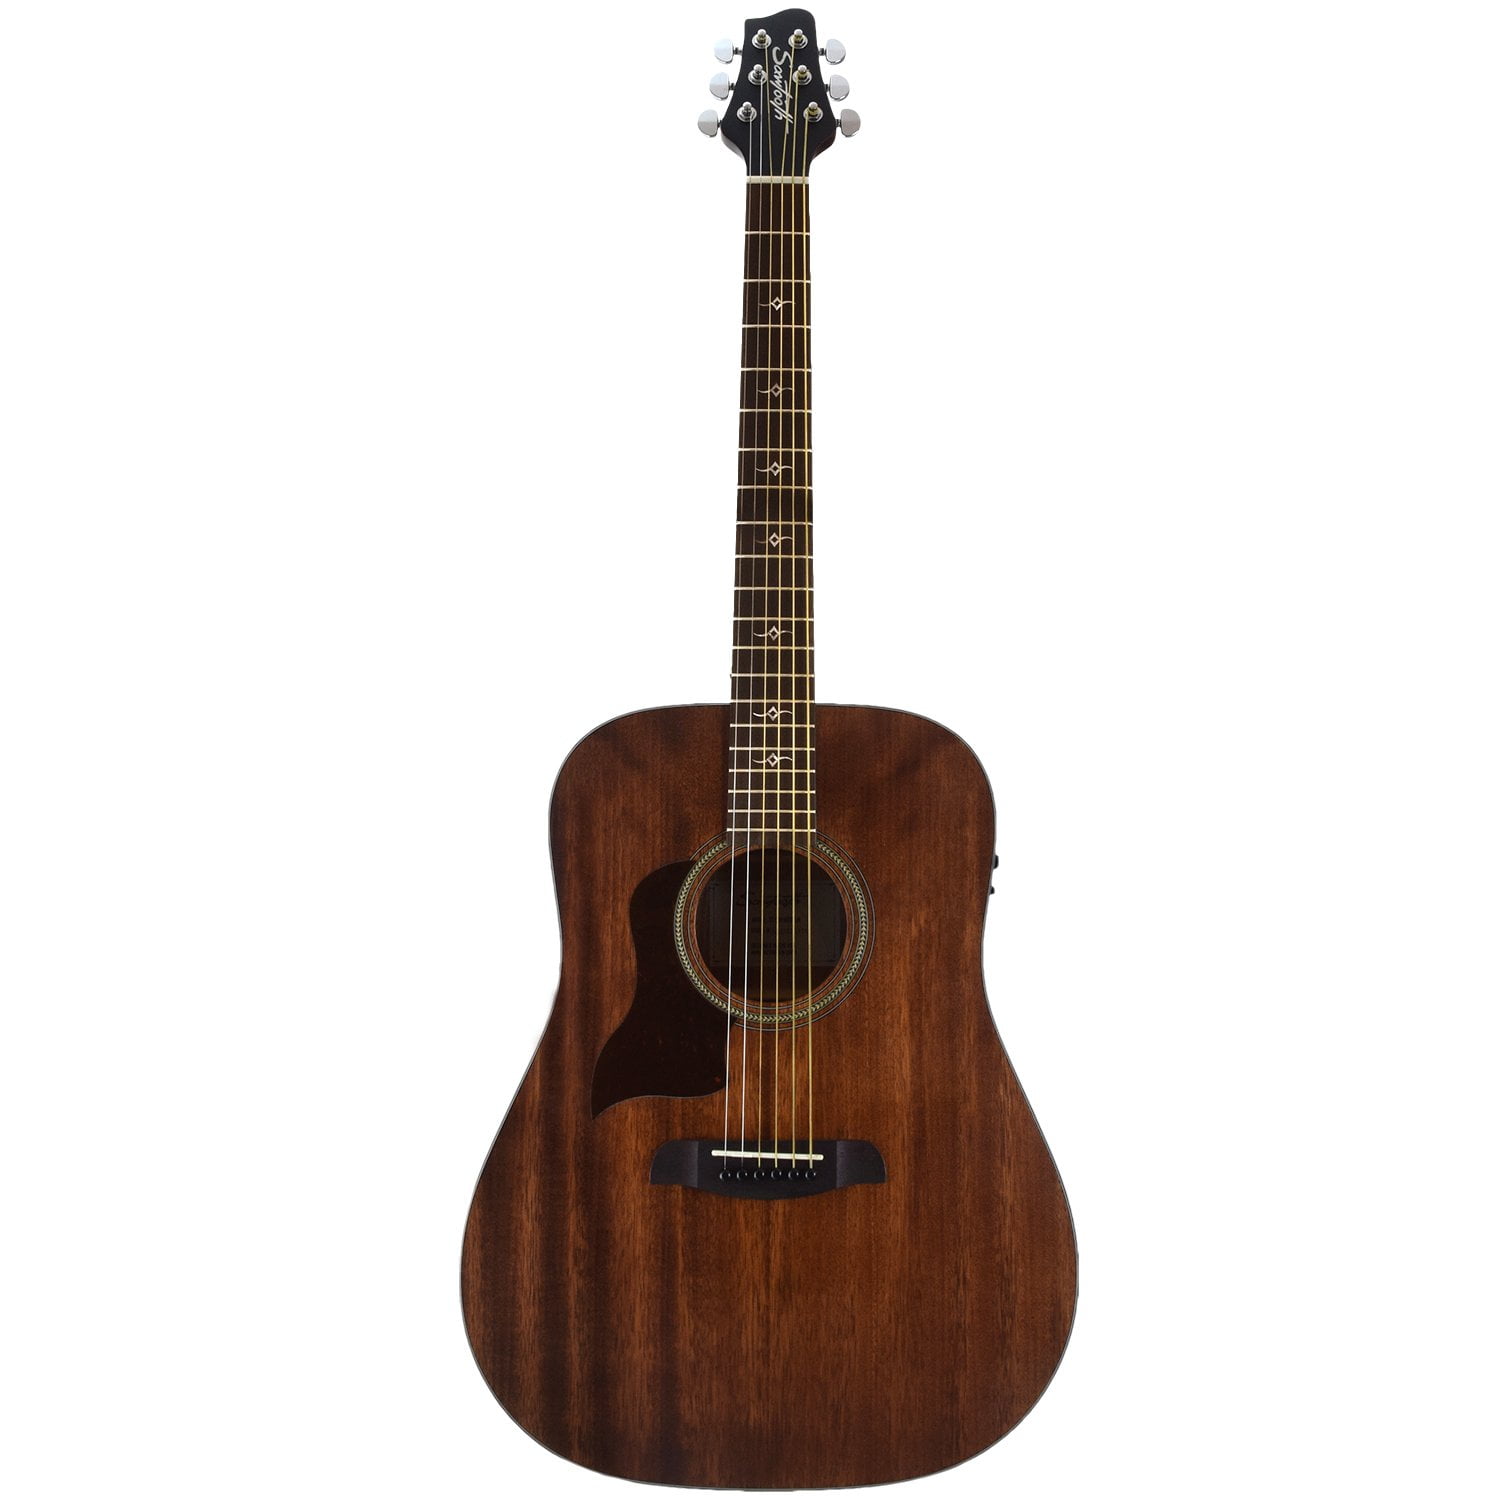 Vangoa LEFT HANDED 12 String Guitar Acoustic electric Cutaway 42 Inch Full Size Dreadnought Spruce Top Sapele Body for Beginners Teens Adults Black Matte